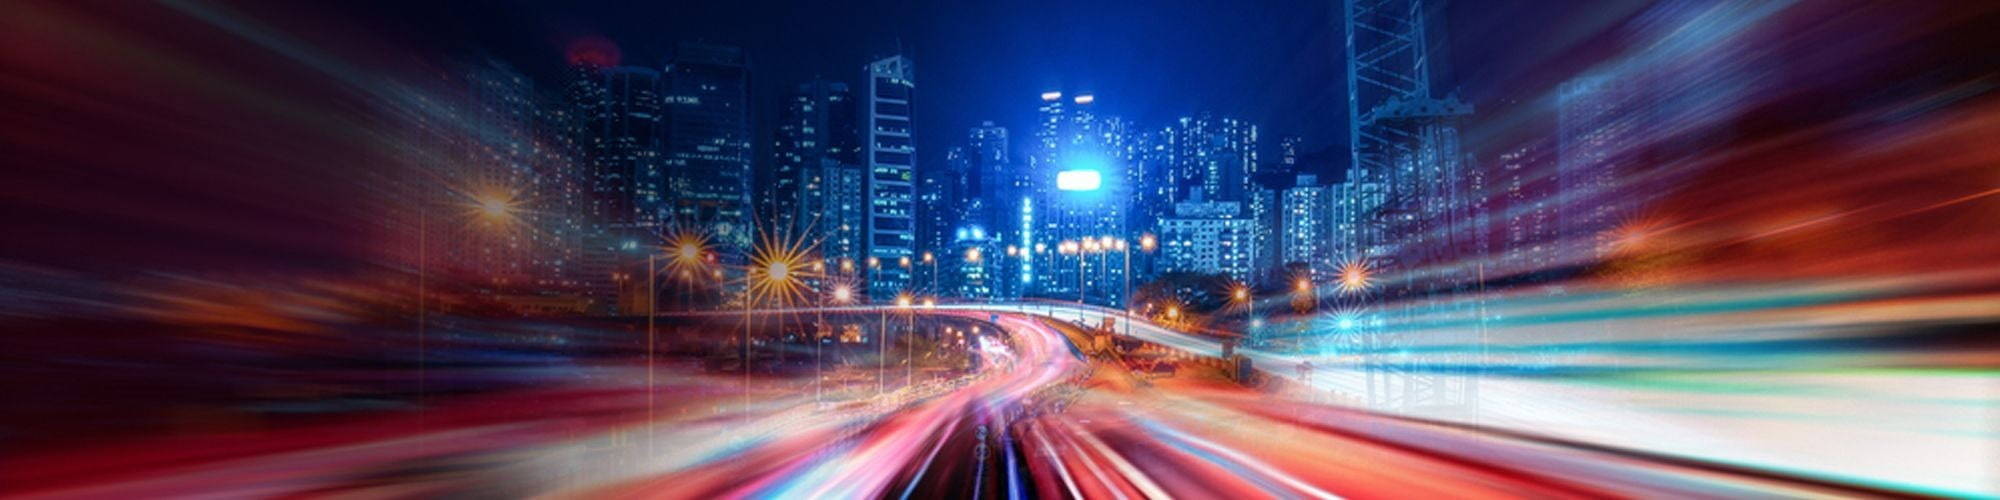 Highway with lights and city background